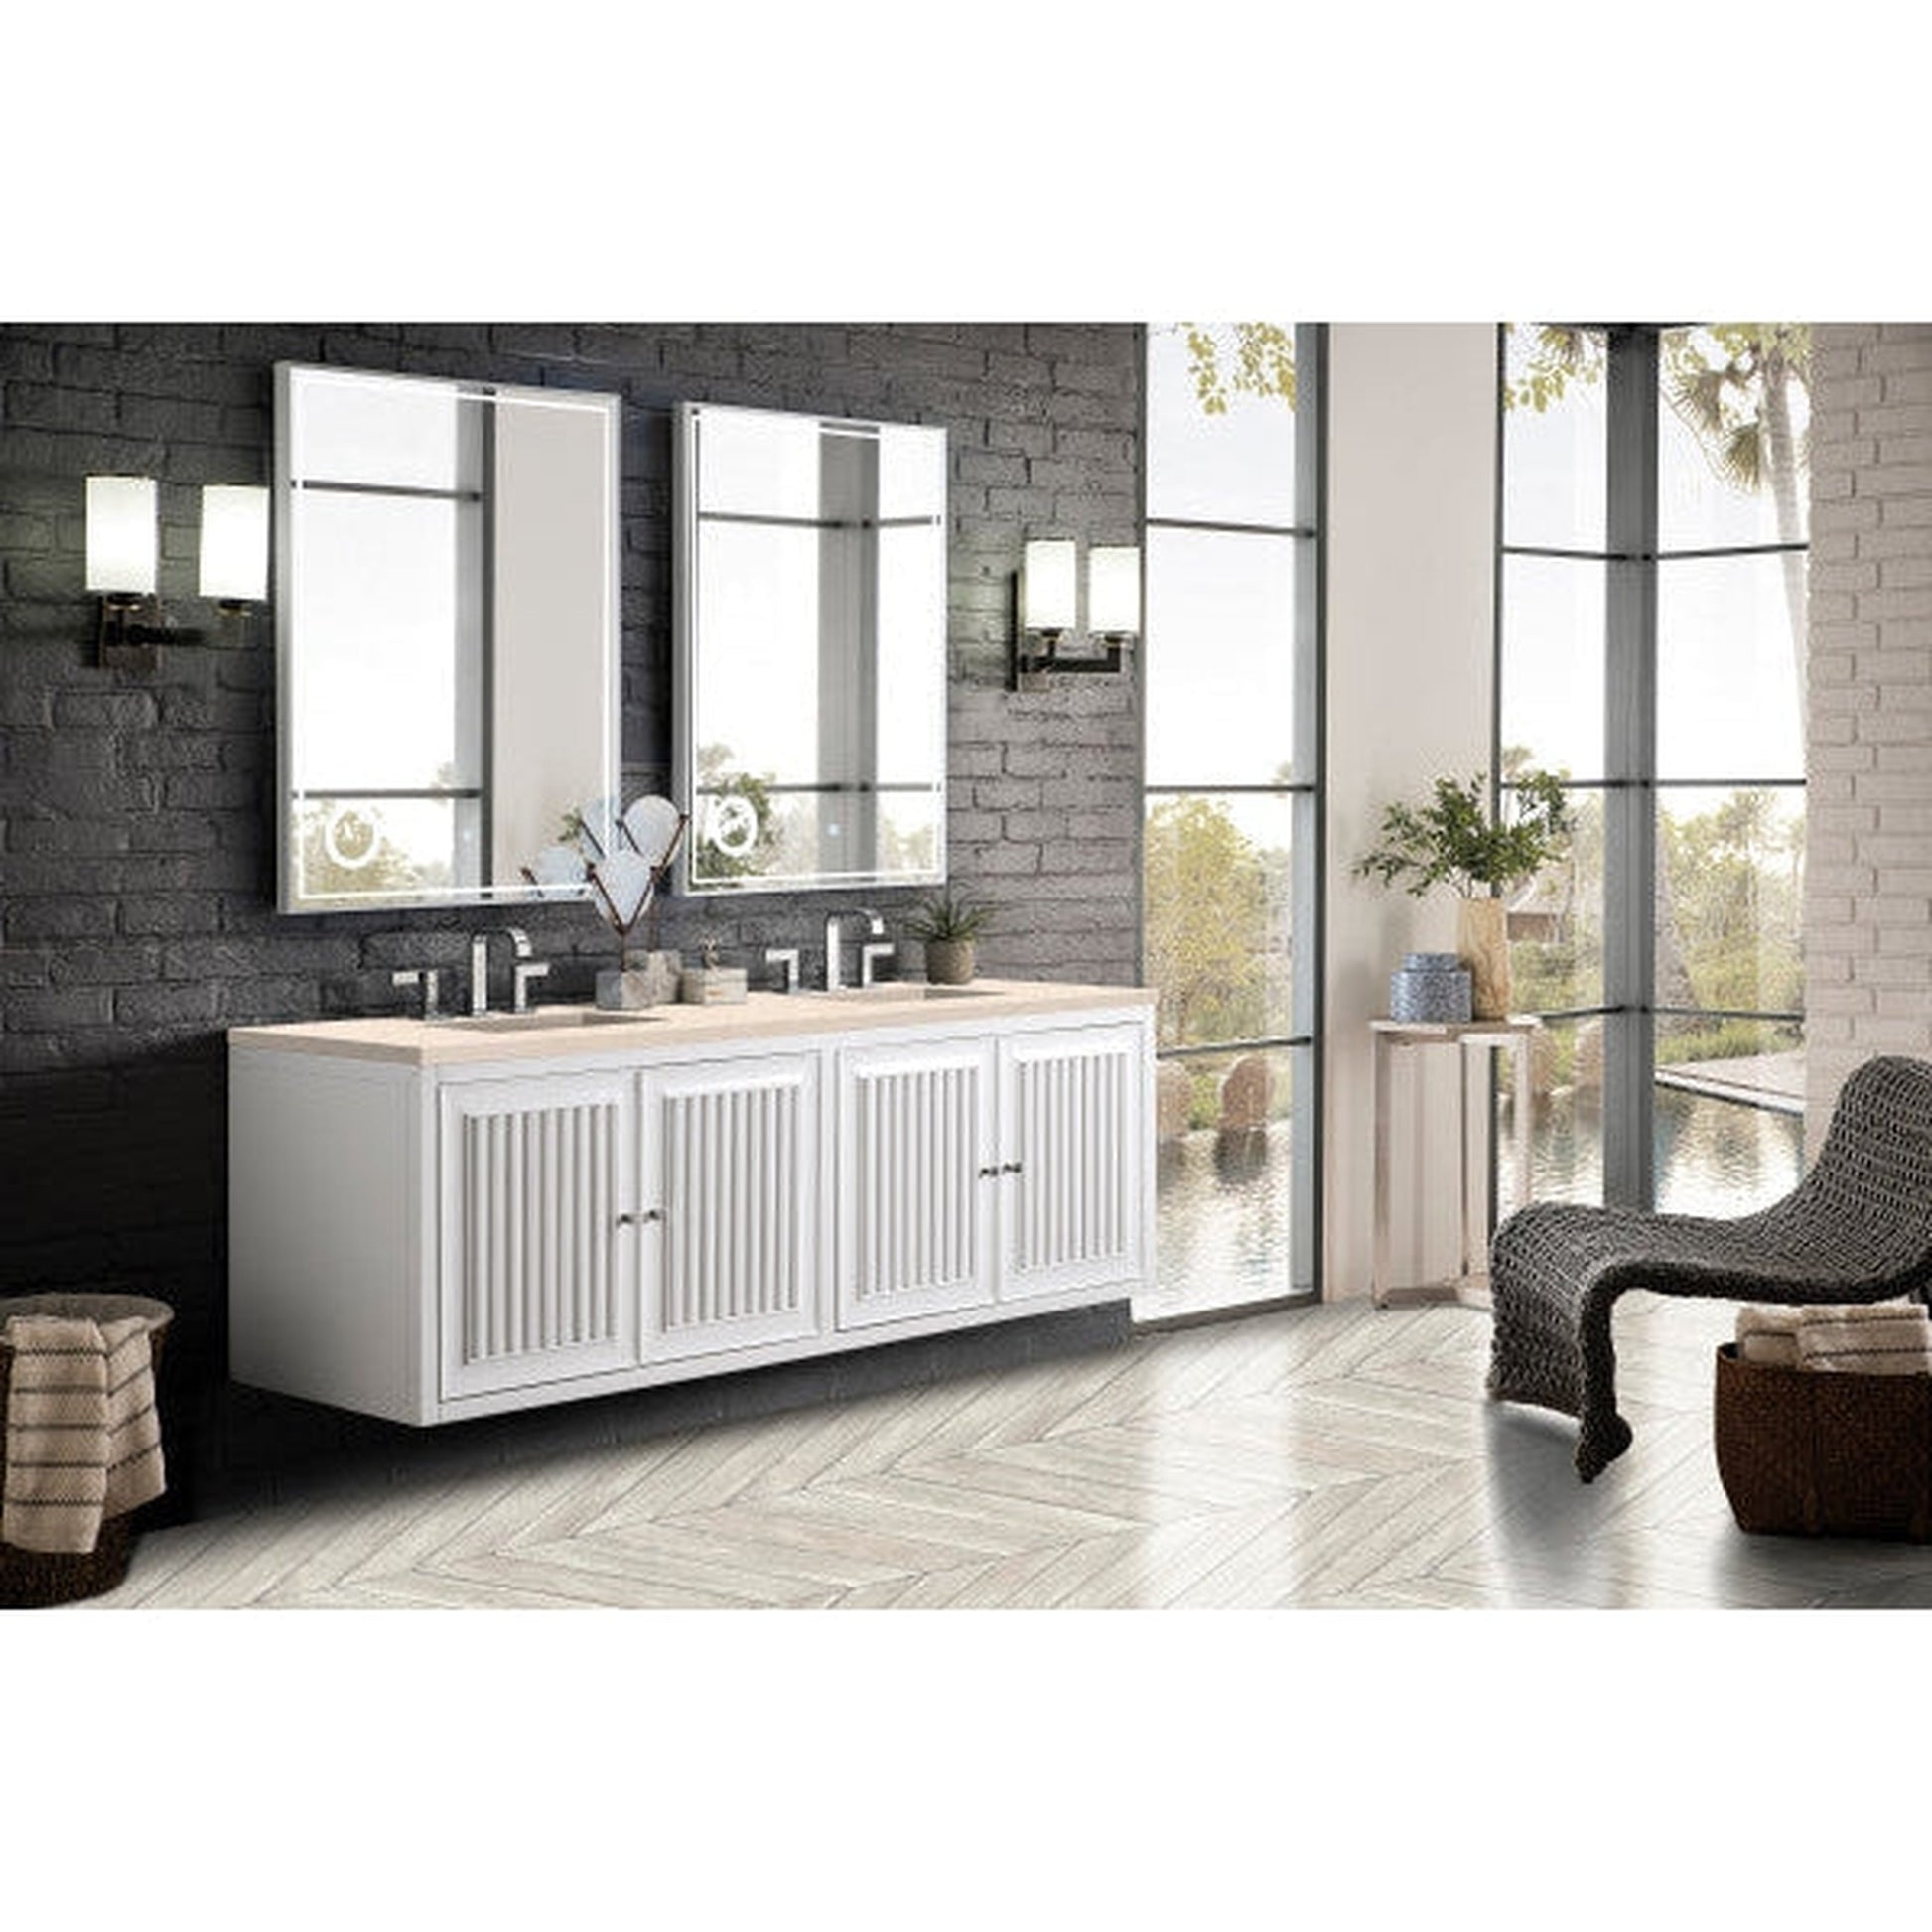 James Martin Athens 72" Double Glossy White Bathroom Vanity With 1" Eternal Marfil Quartz Top and Rectangular Ceramic Sink